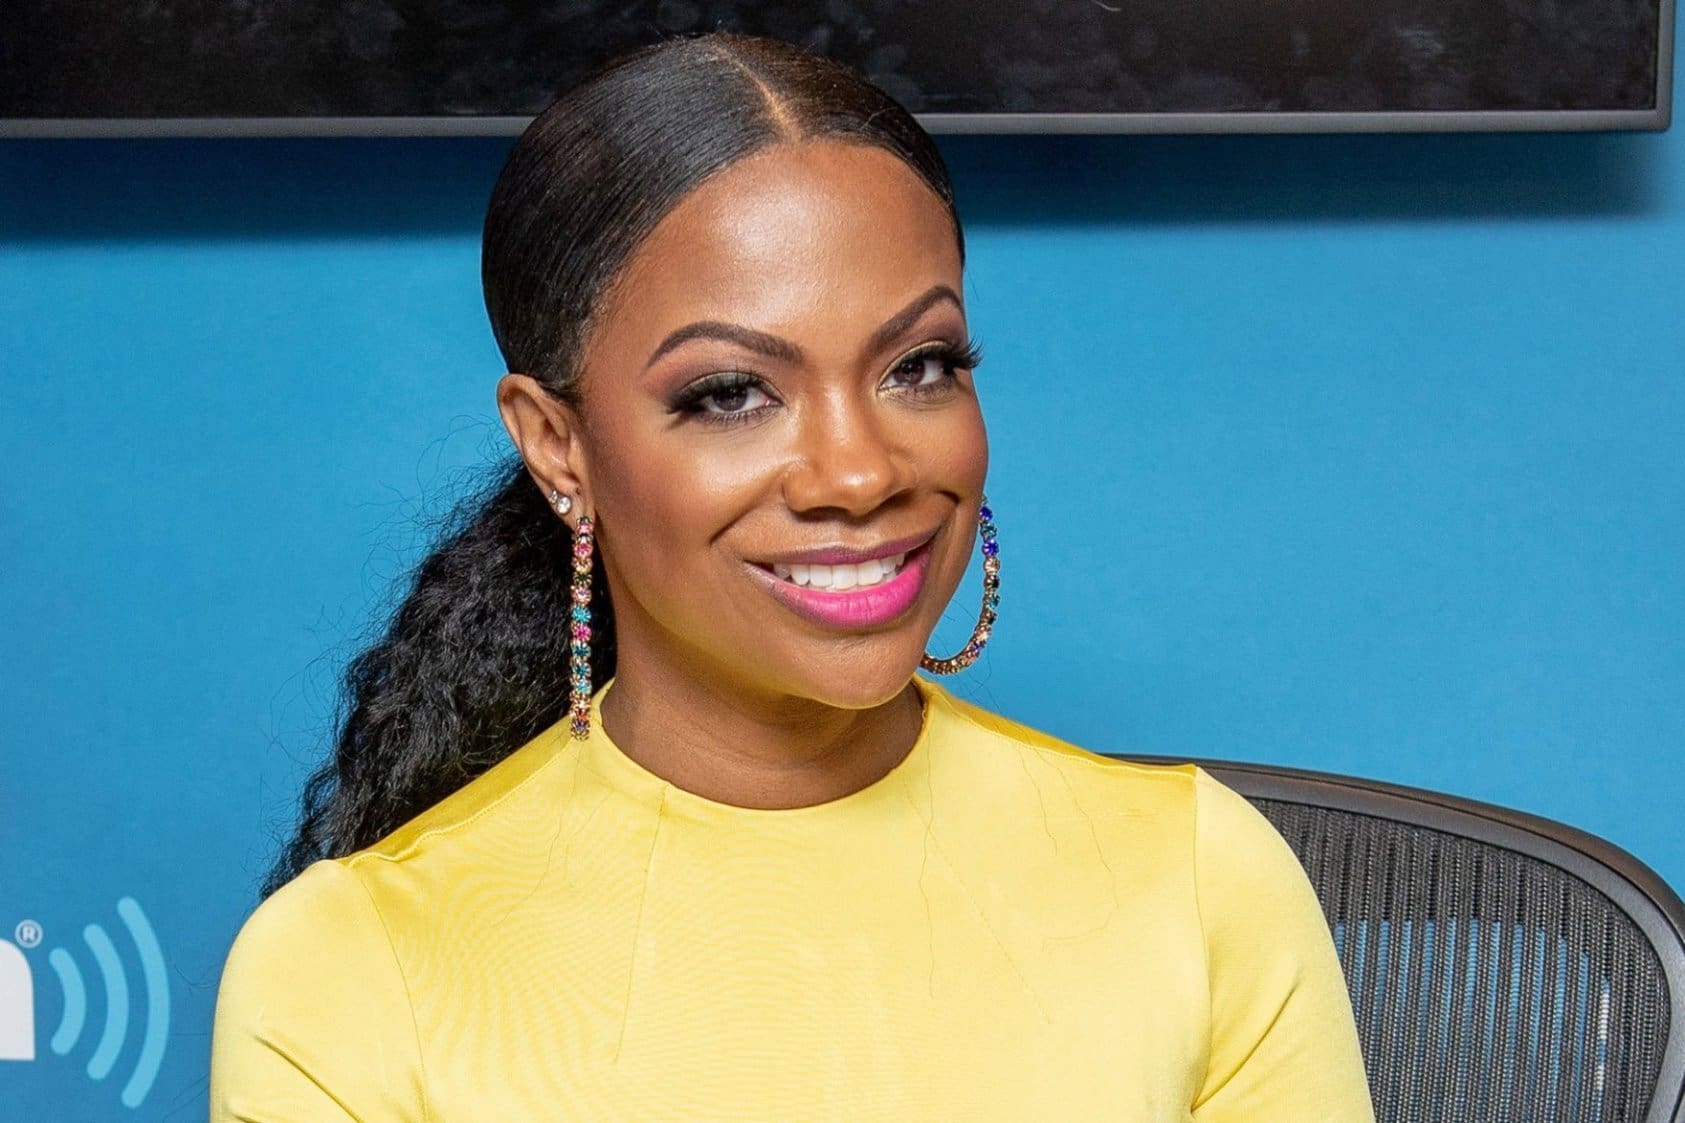 Kandi Burruss' 'Money Making Monday' Song Has People Who Need Some Motivation In Awe